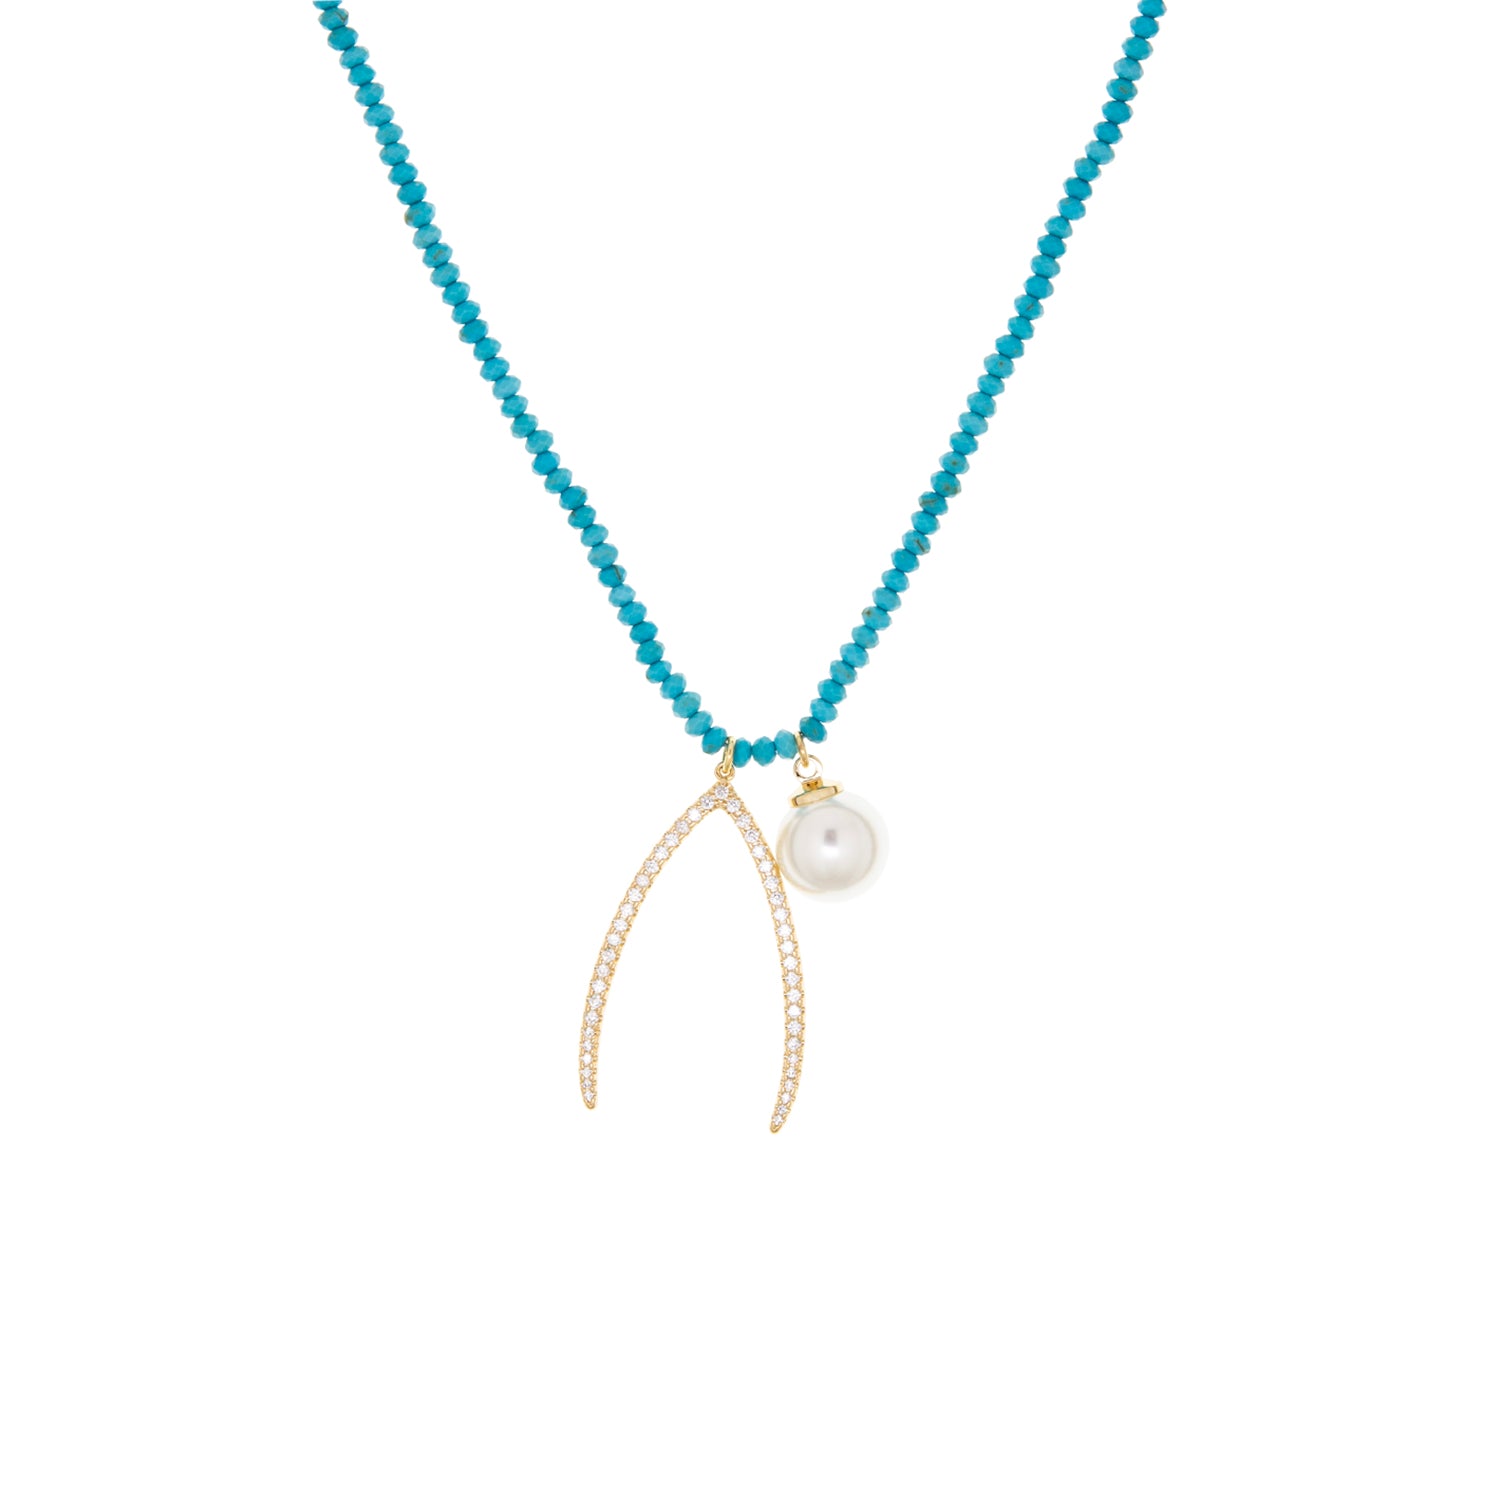 natural stone necklace with wishbone + pearl charms